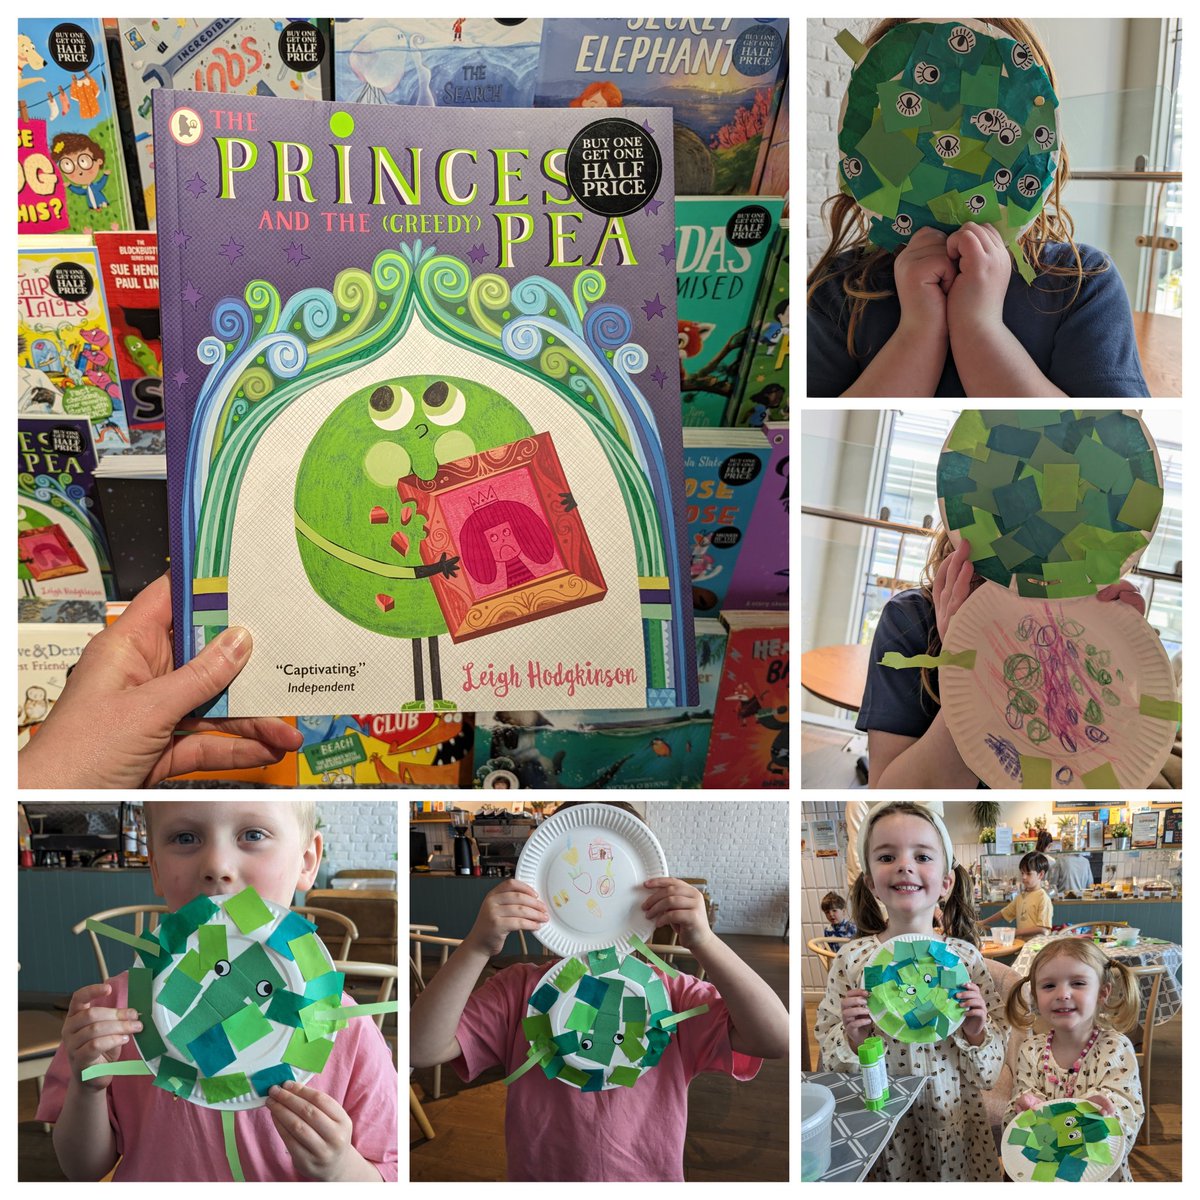 We read The Princess and the (Greedy) Pea for Read and Make today (and laughed A LOT!) then made our own very greedy peas! A hilarious twist on the well-known tale, told in the style of There Was an Old Woman Who Swallowed a Fly - this is so much fun!